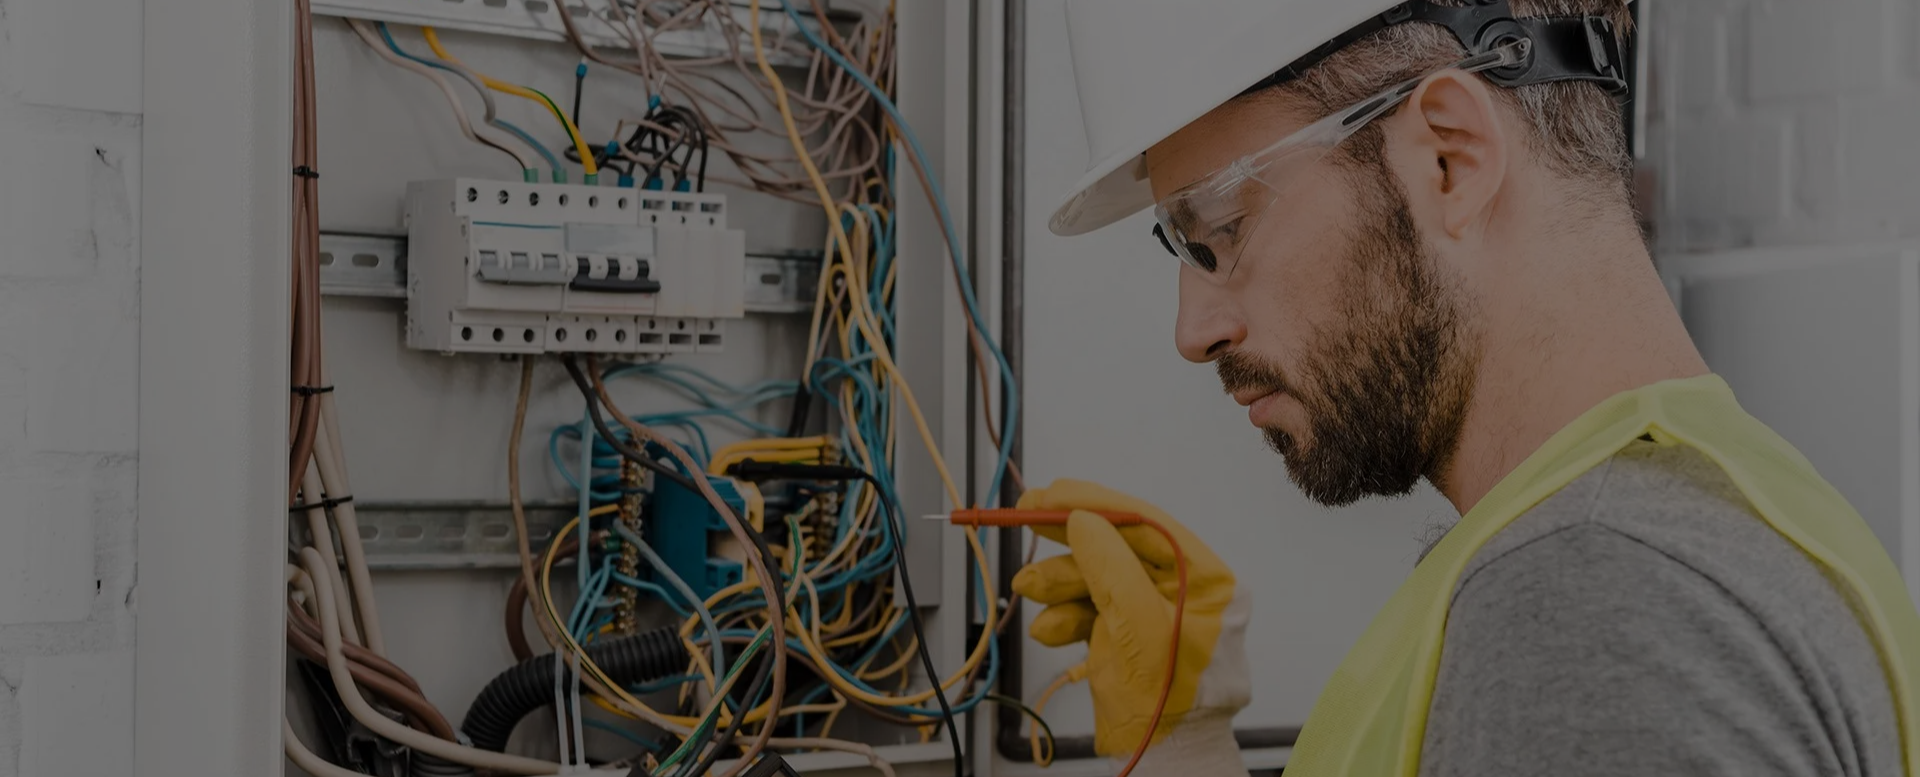 DIY vs. Professional Electrical Services: Why You Should Hire a Handyman